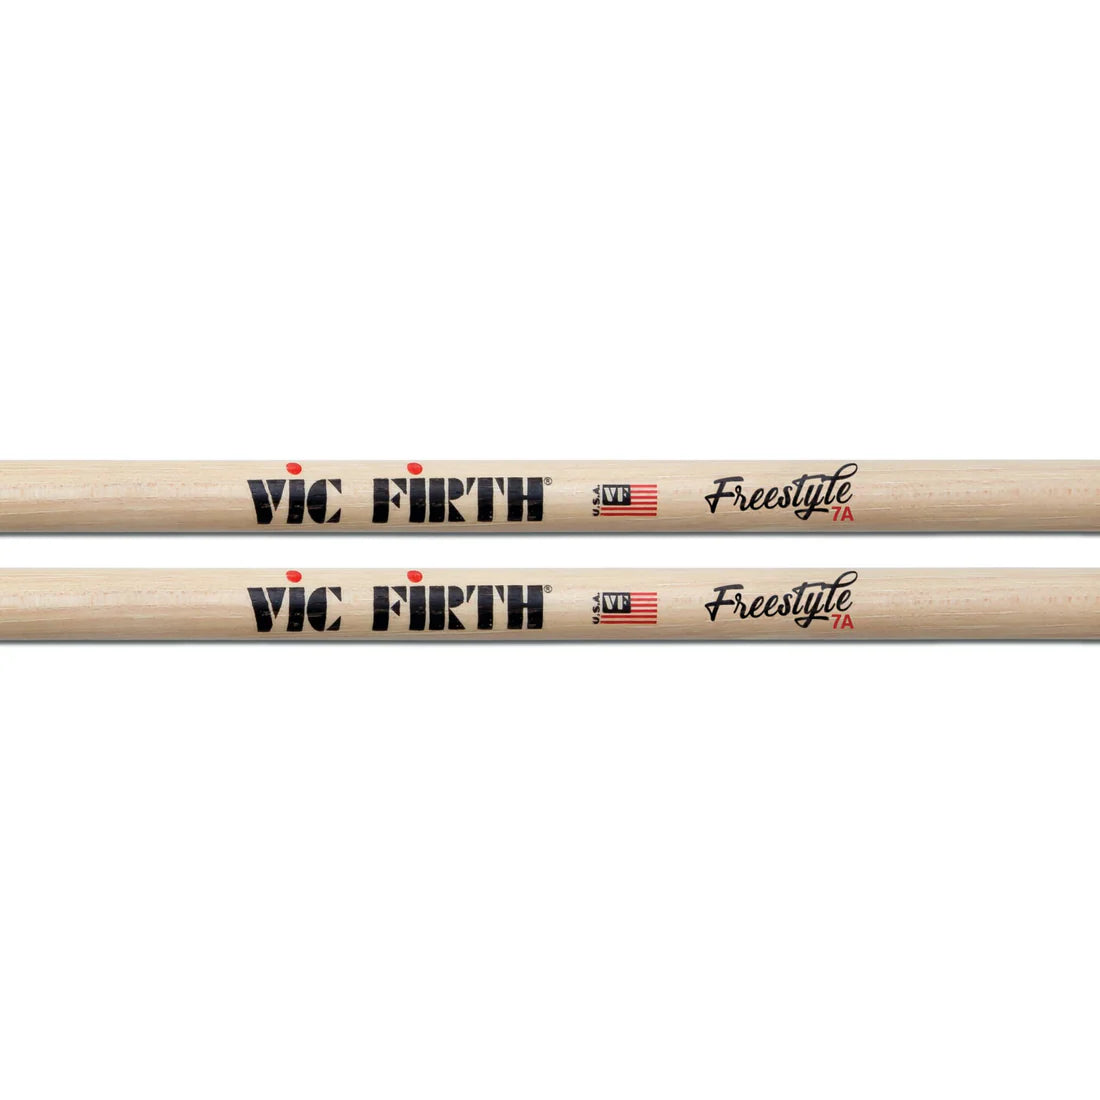 Vic Firth American Concept - Freestyle 7A